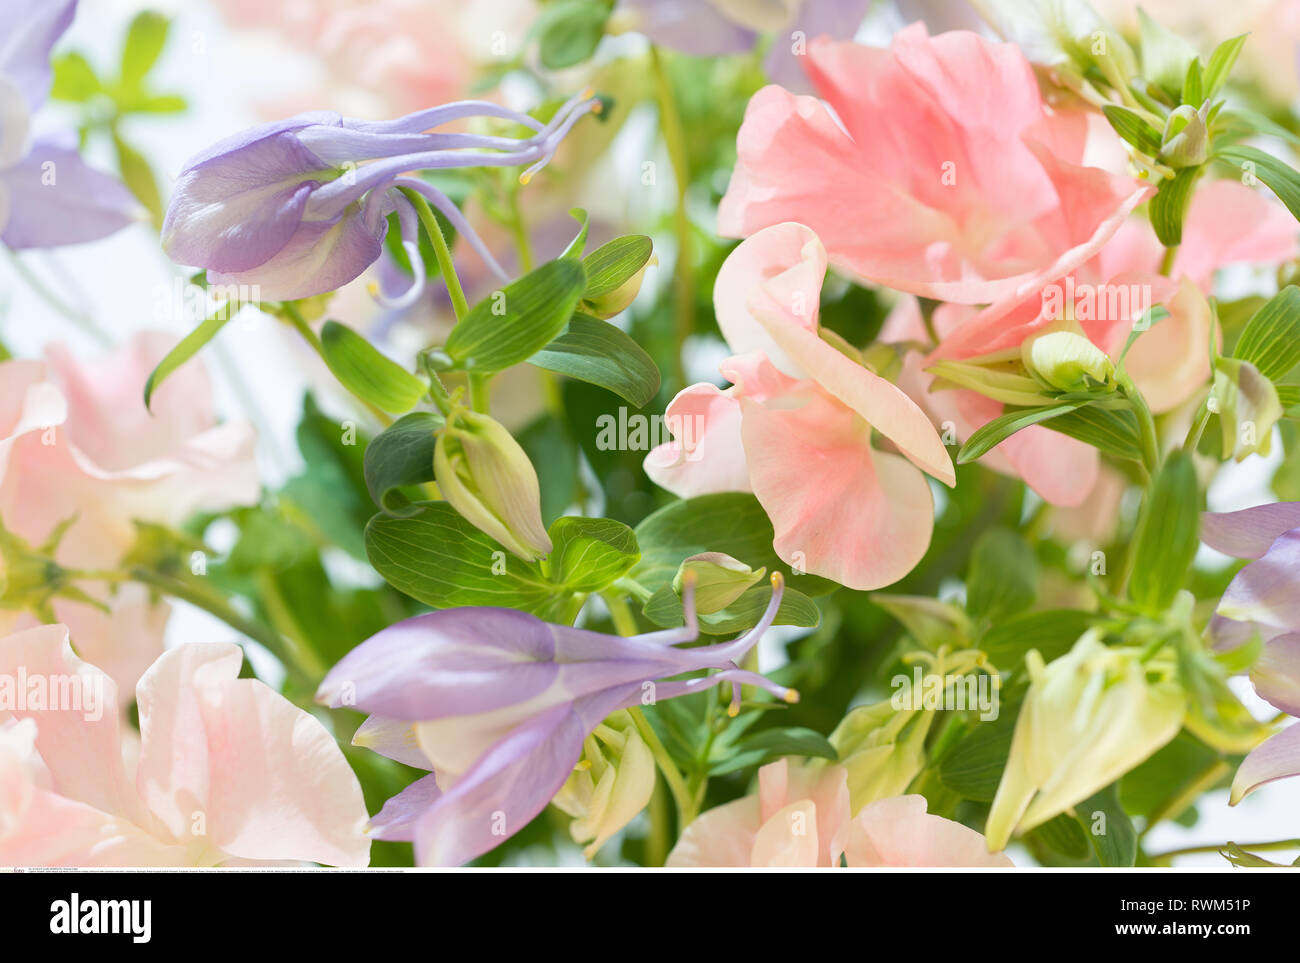 botany, soft bunch with columbine and vetch, Caution! For Greetingcard-Use / Postcard-Use In German Speaking Countries Certain Restrictions May Apply Stock Photo